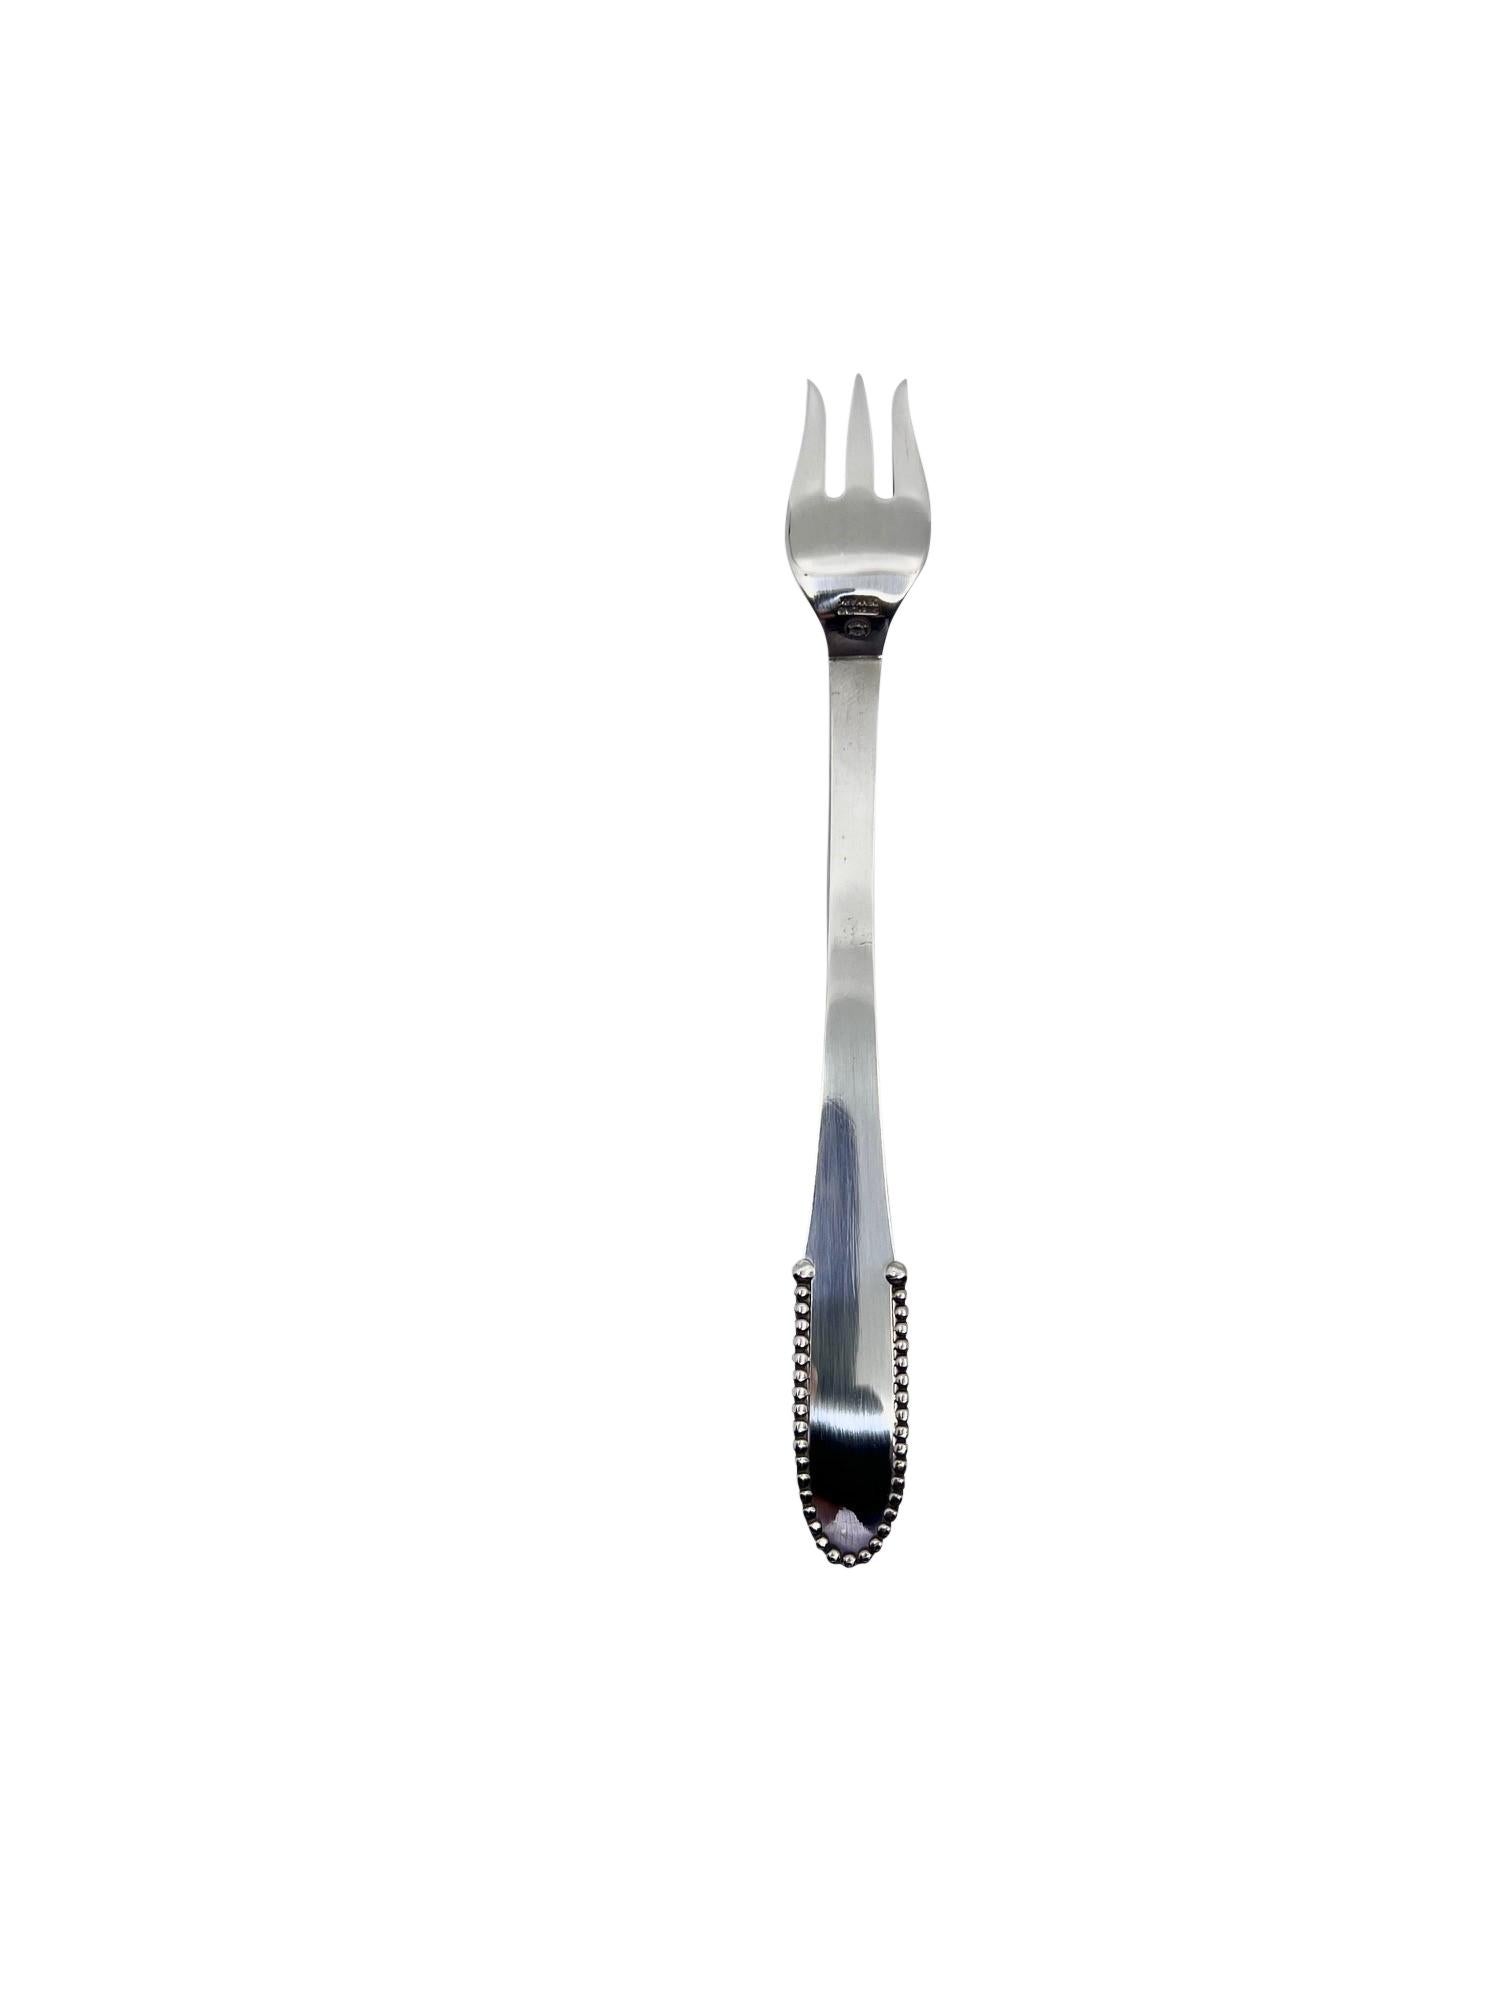 A Georg Jensen silver oyster/cocktail fork, item #064 in the Beaded pattern, design #7 by Georg Jensen from 1916.

Additional information:
Material: Sterling silver
Styles: Art Nouveau
Hallmarks: Georg Jensen hallmark sterling Denmark
Dimensions: